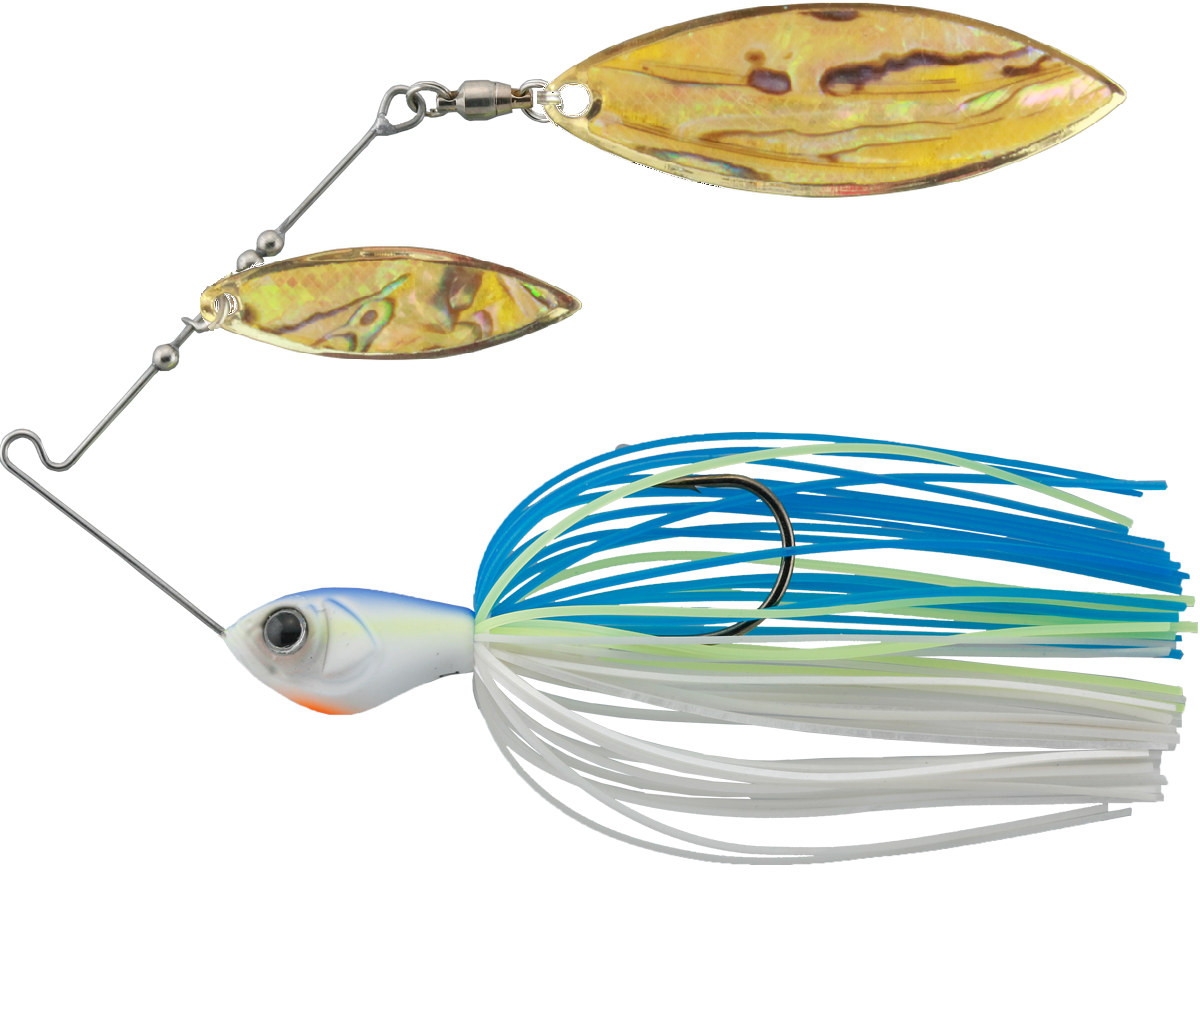 Zinx Mini Super Blade TG Shell Series – The Hook Up Tackle